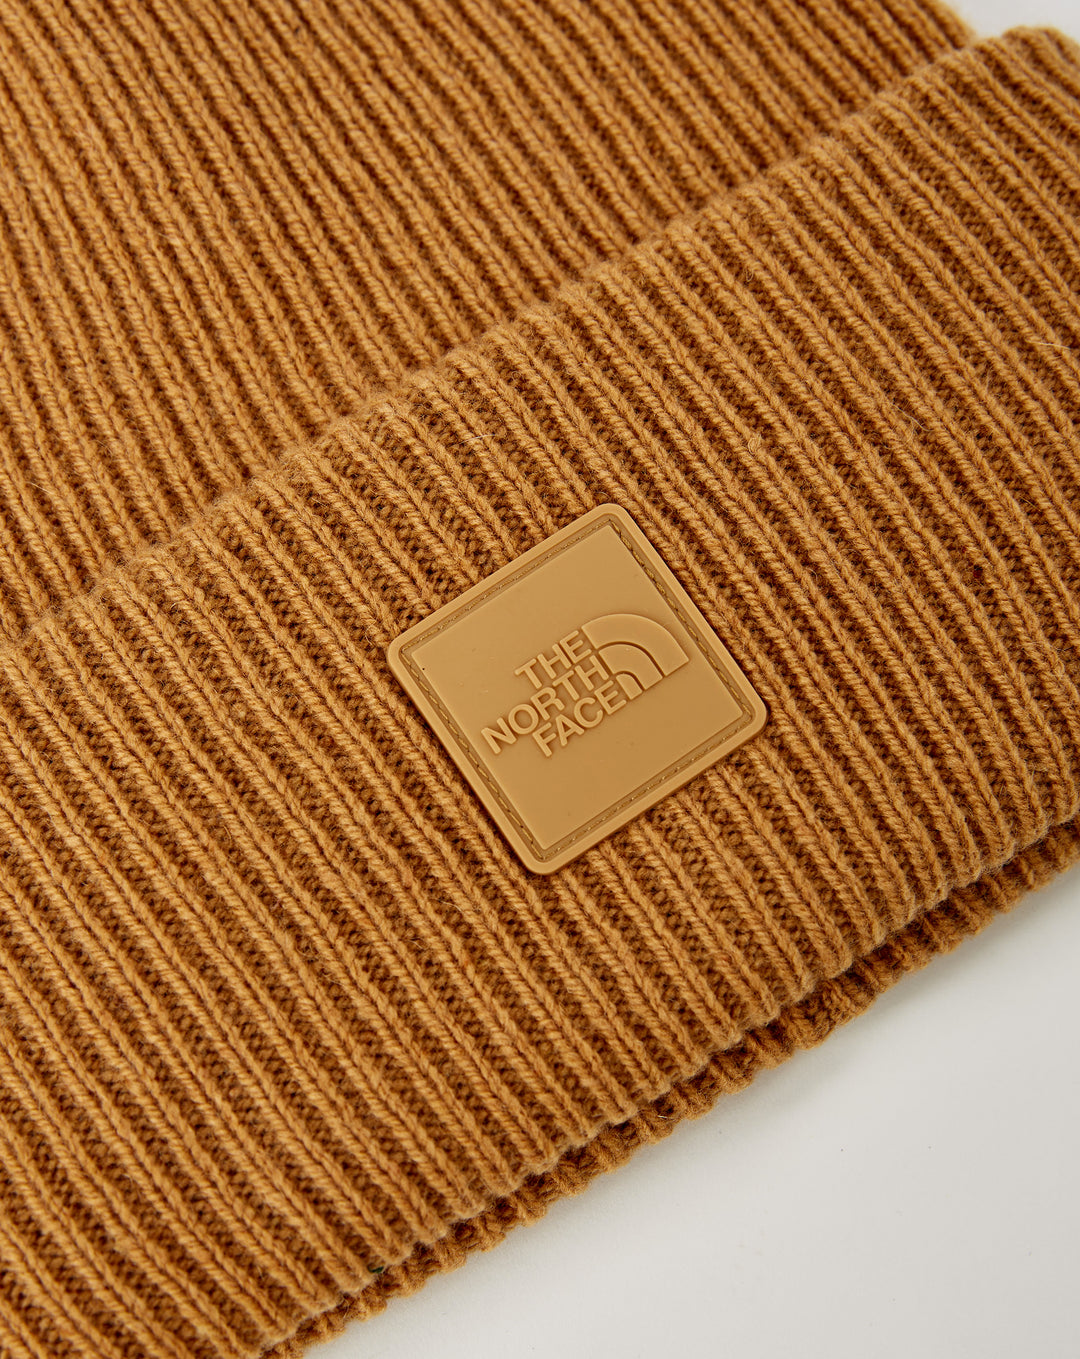 The North Face Urban Patch Beanie  - XHIBITION